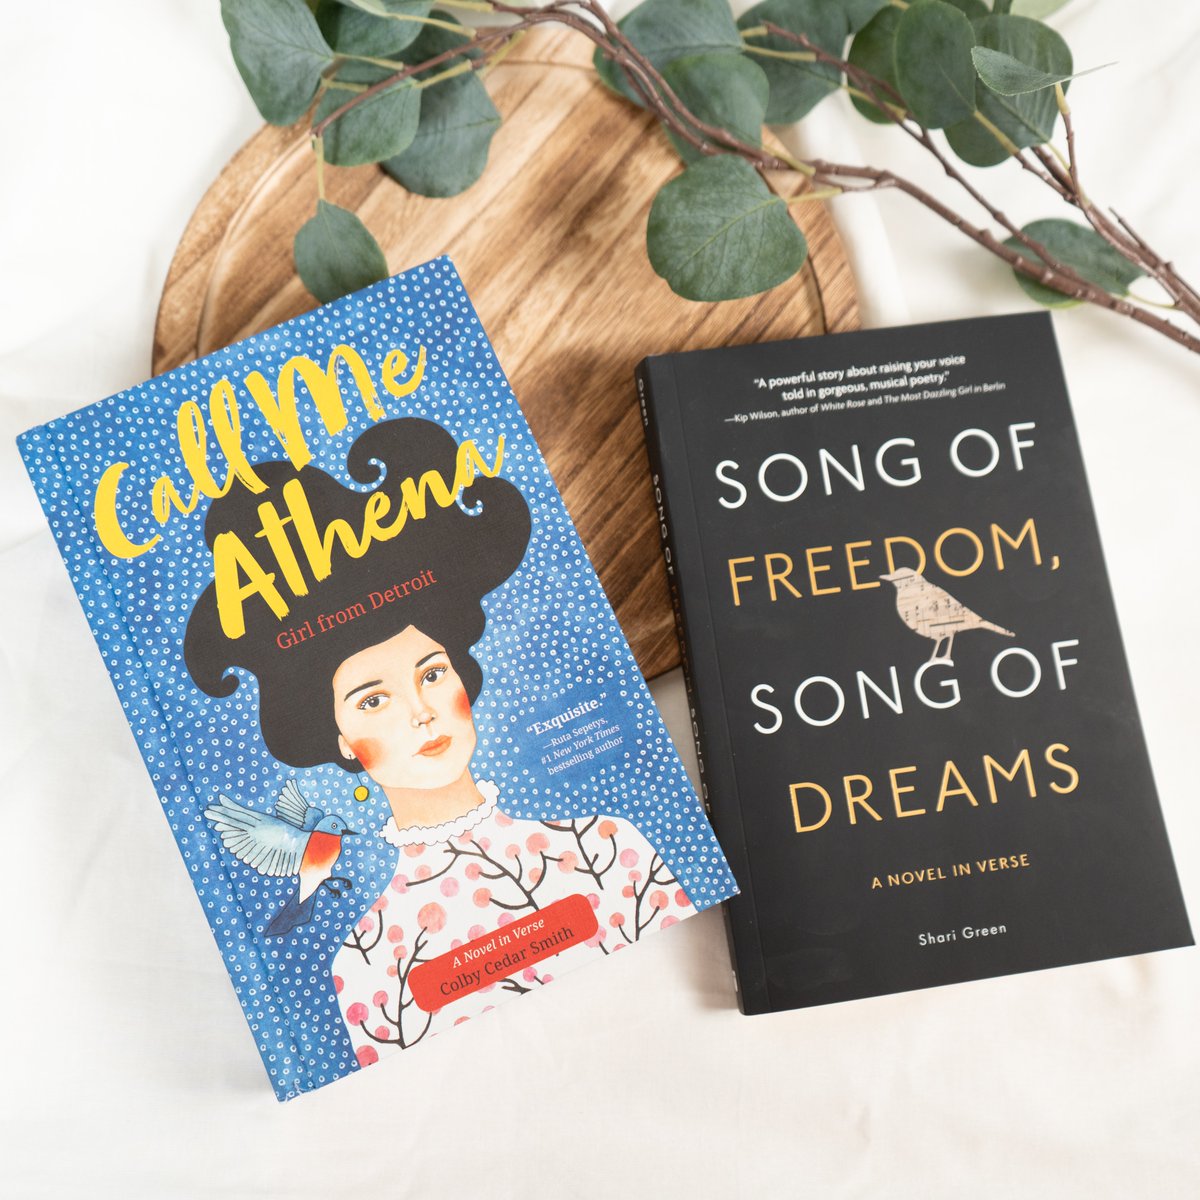 Looking for some #NationalPoetryMonth recommendations? We've got two amazing novels in verse for you ✨ @ColbyCedar @sharigreen